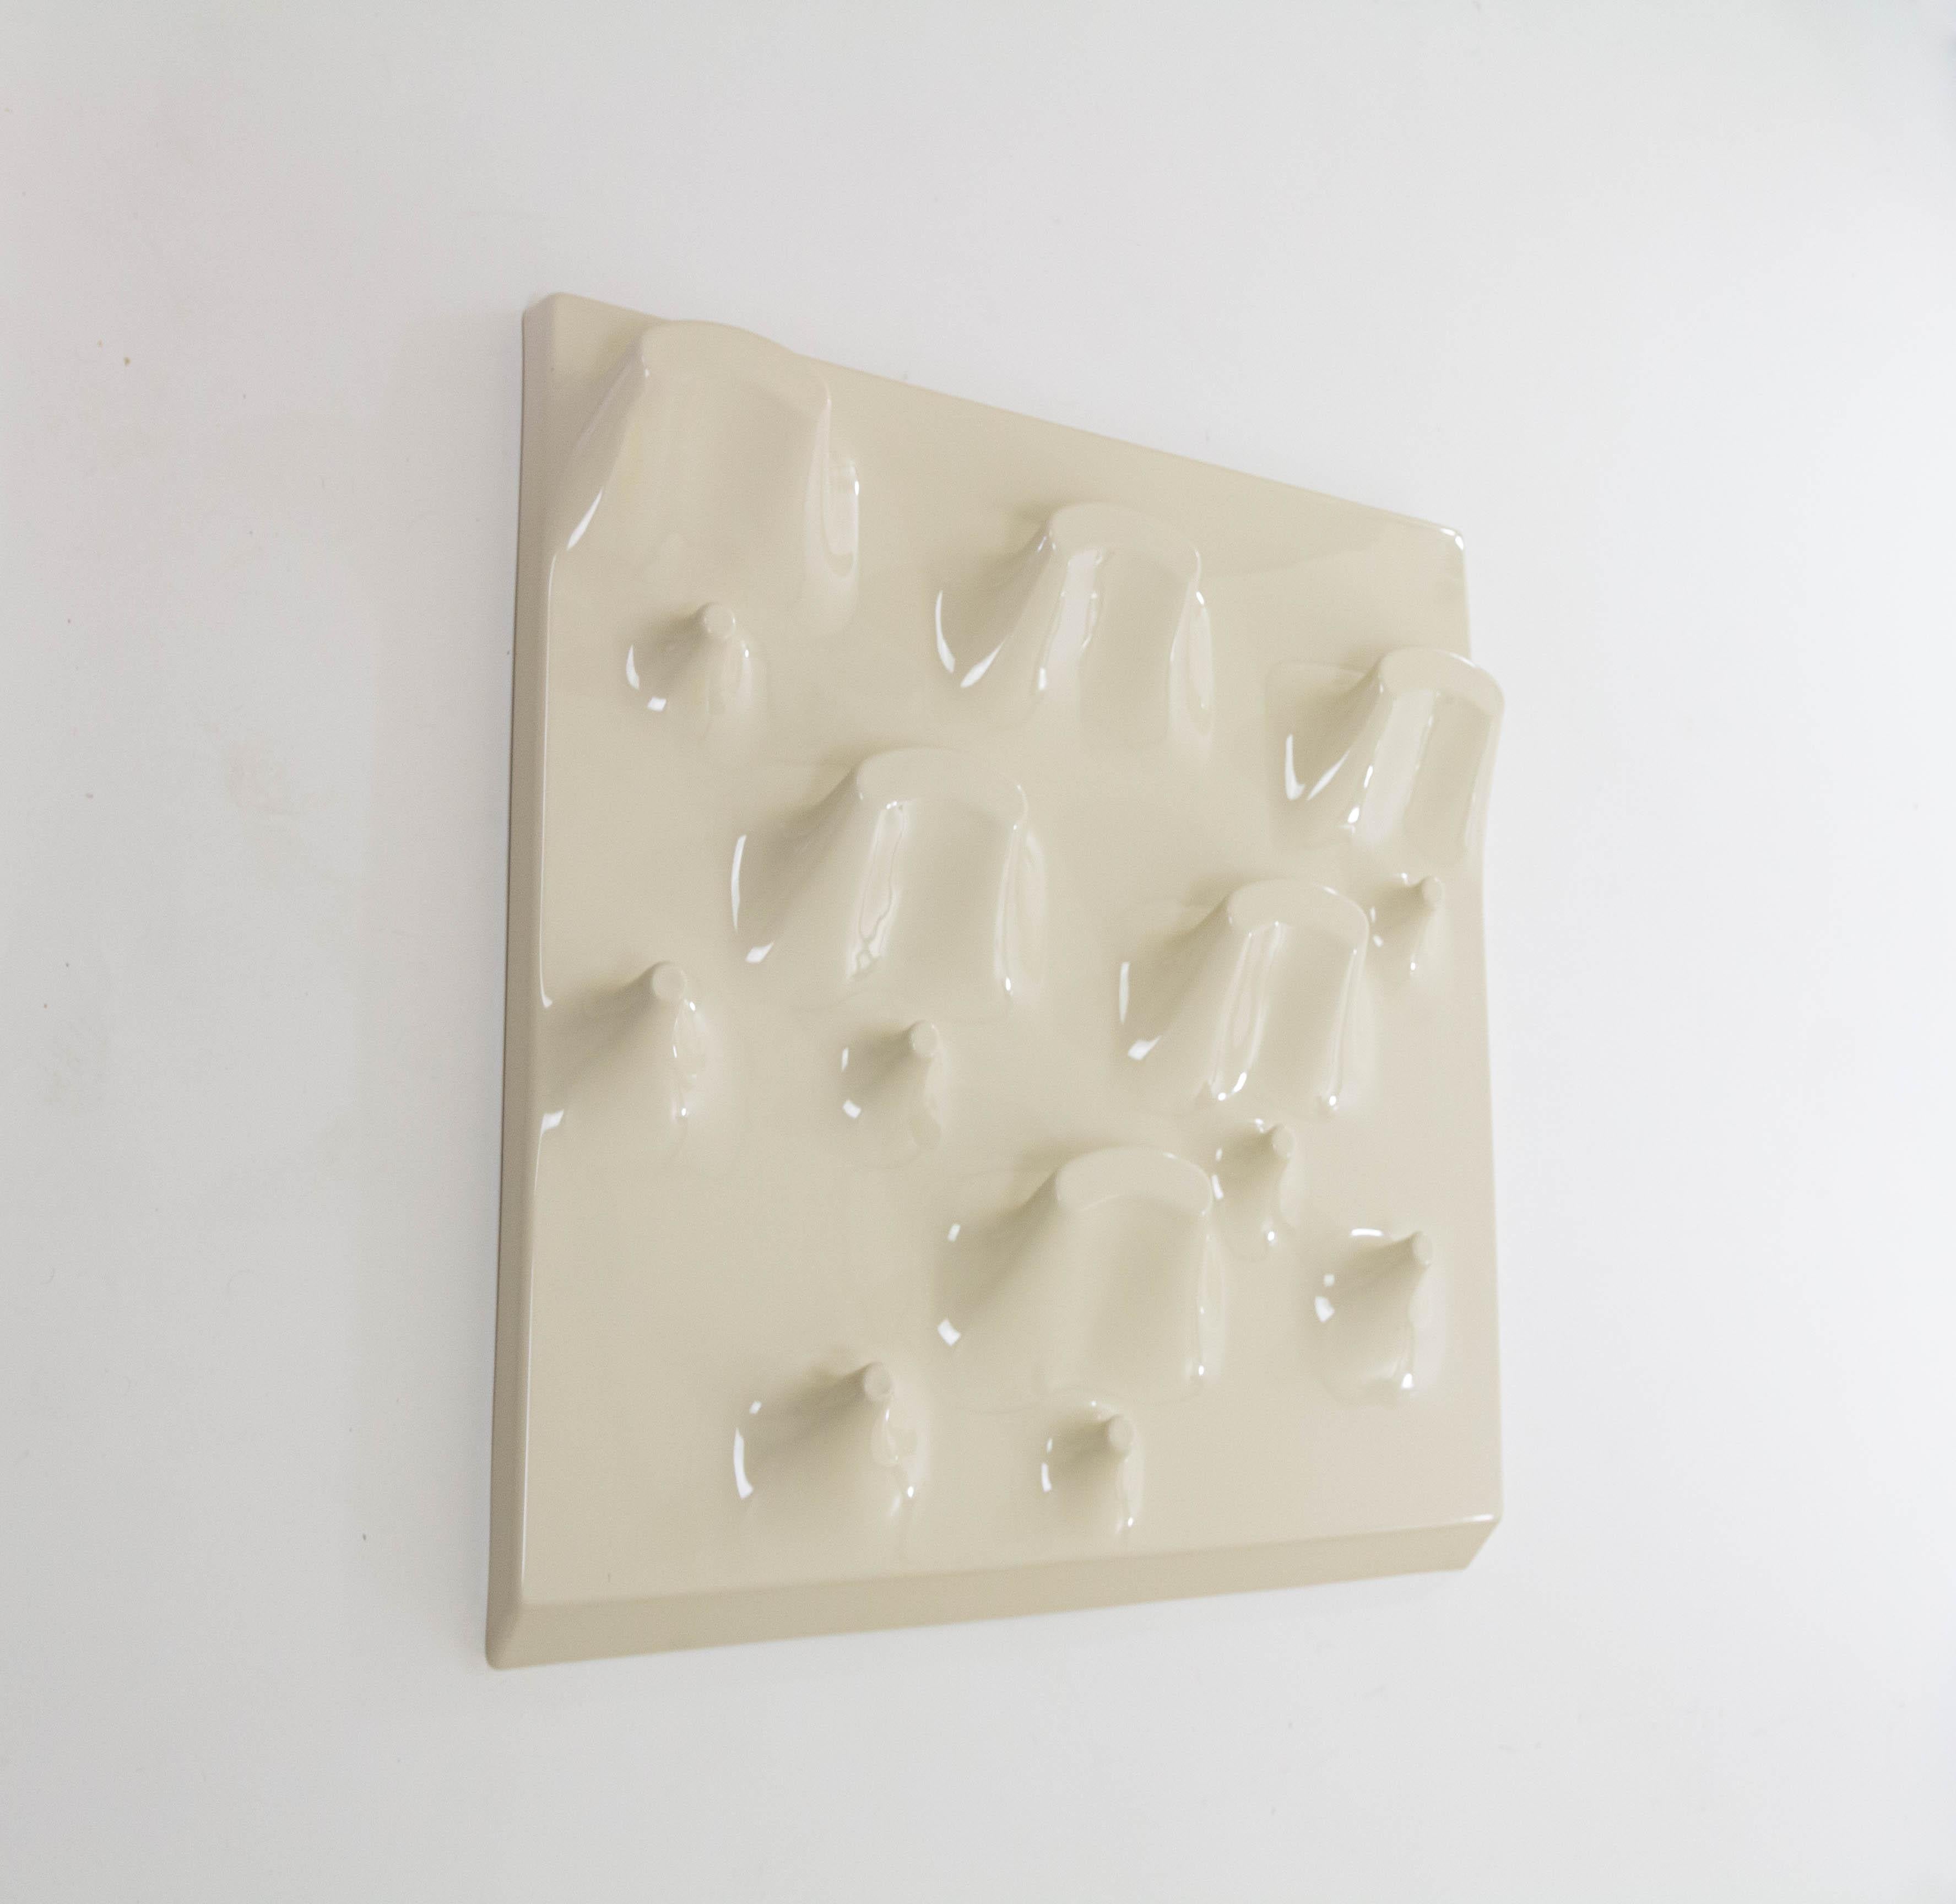 Slab coat rack, which doubles as a sculptural wall object, designed by Jonathan De Pas, Donato D’Urbino and Paolo Lomazzi for Longato Arredamenti in Italy in 1969.

This object, designed as a coat rack, is made of plastic and has fourteen hooks in